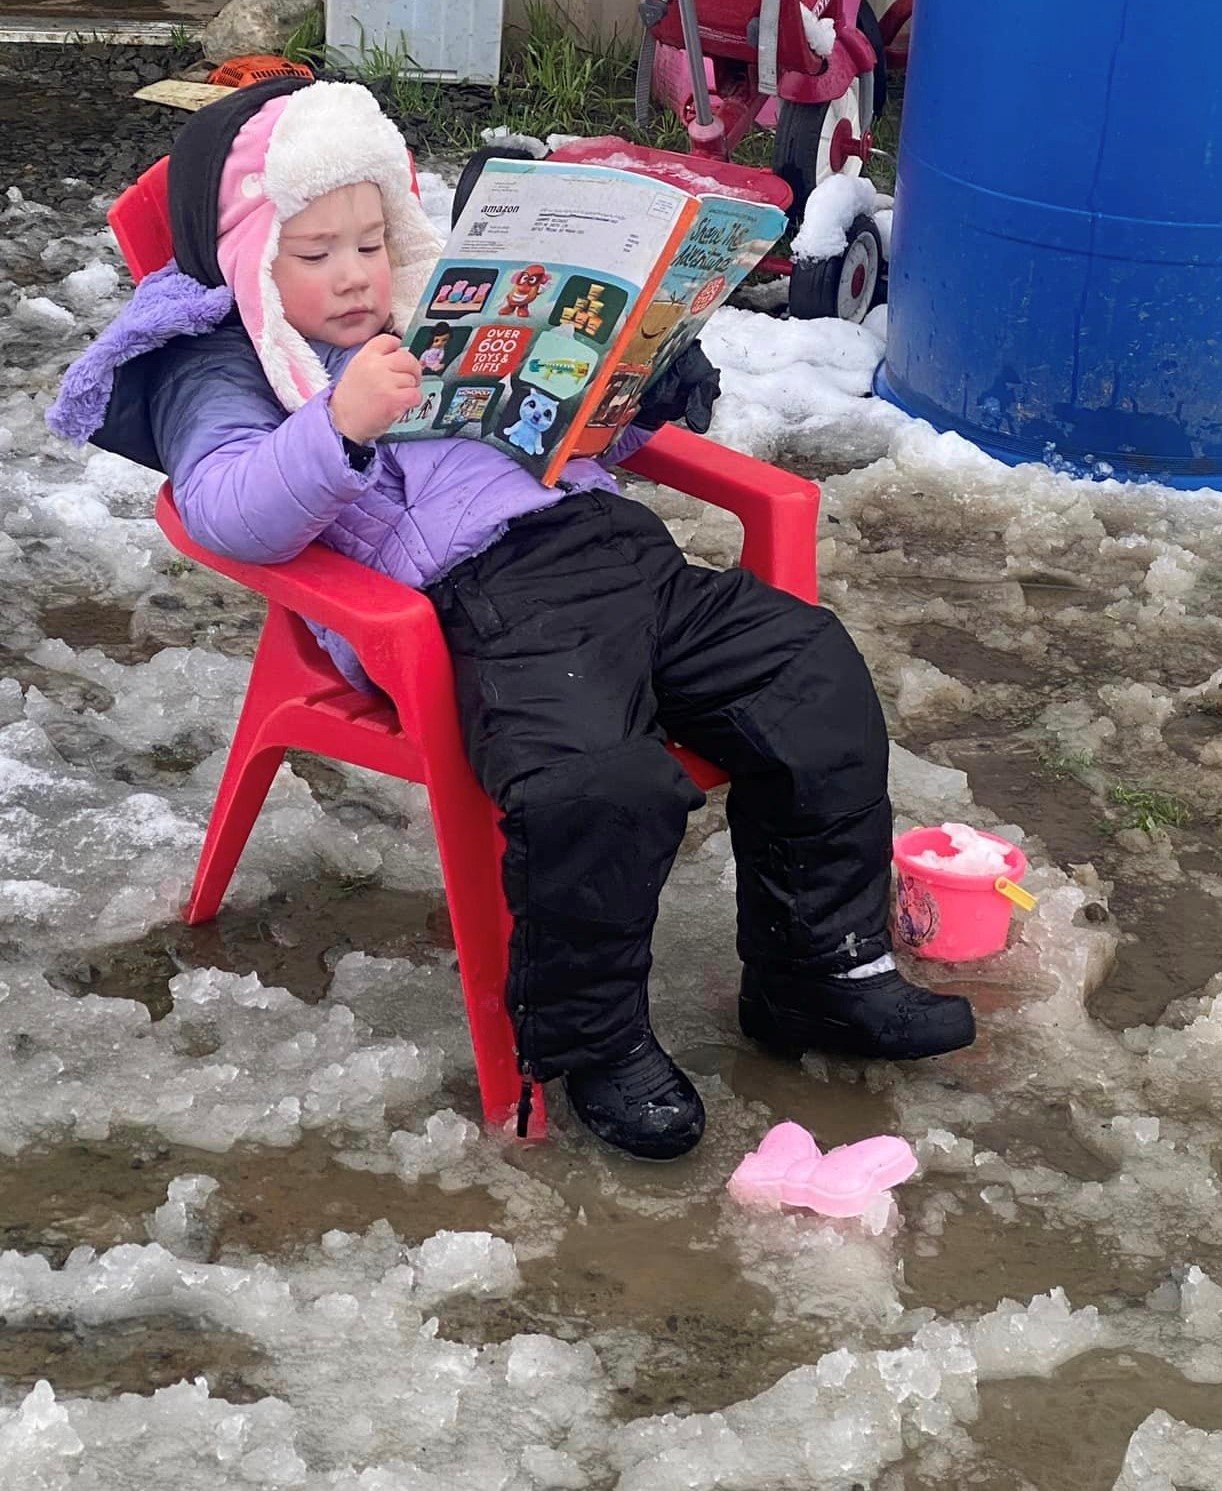 Hayden Jackson takes a break after playing in the snow in this photo taken by her mom Ashley Ueltschi.